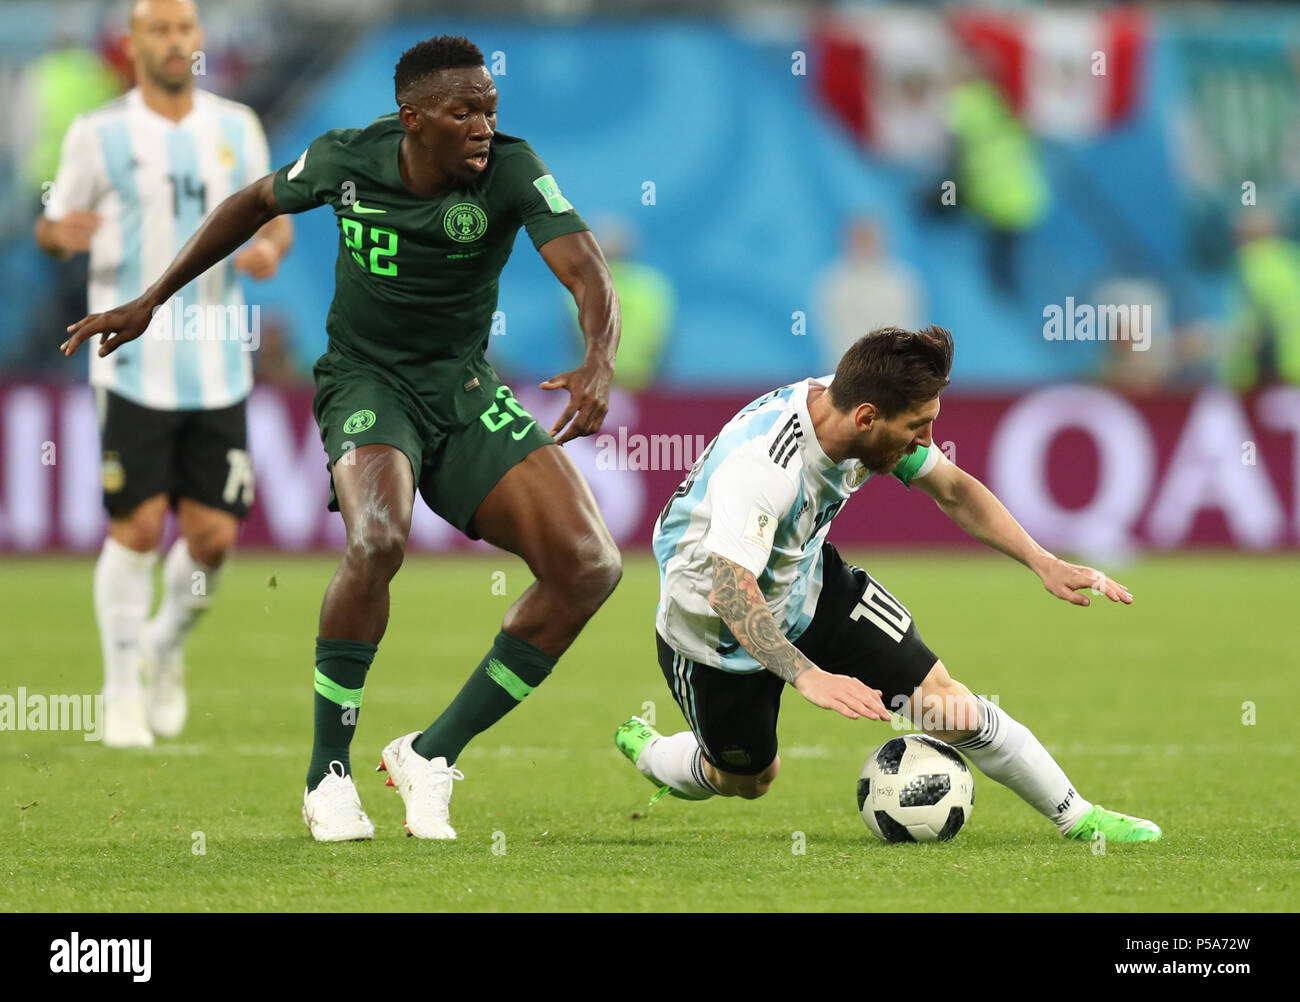 Saint Petersburg, Russia. 26th June, 2018. Lionel Messi (R) of Argentina vies with Kenneth Omeruo of Nigeria during the 2018 FIFA World Cup Group D match between Nigeria and Argentina in Saint Petersburg, Russia, June 26, 2018. Credit: Yang Lei/Xinhua/Alamy Live News Stock Photo